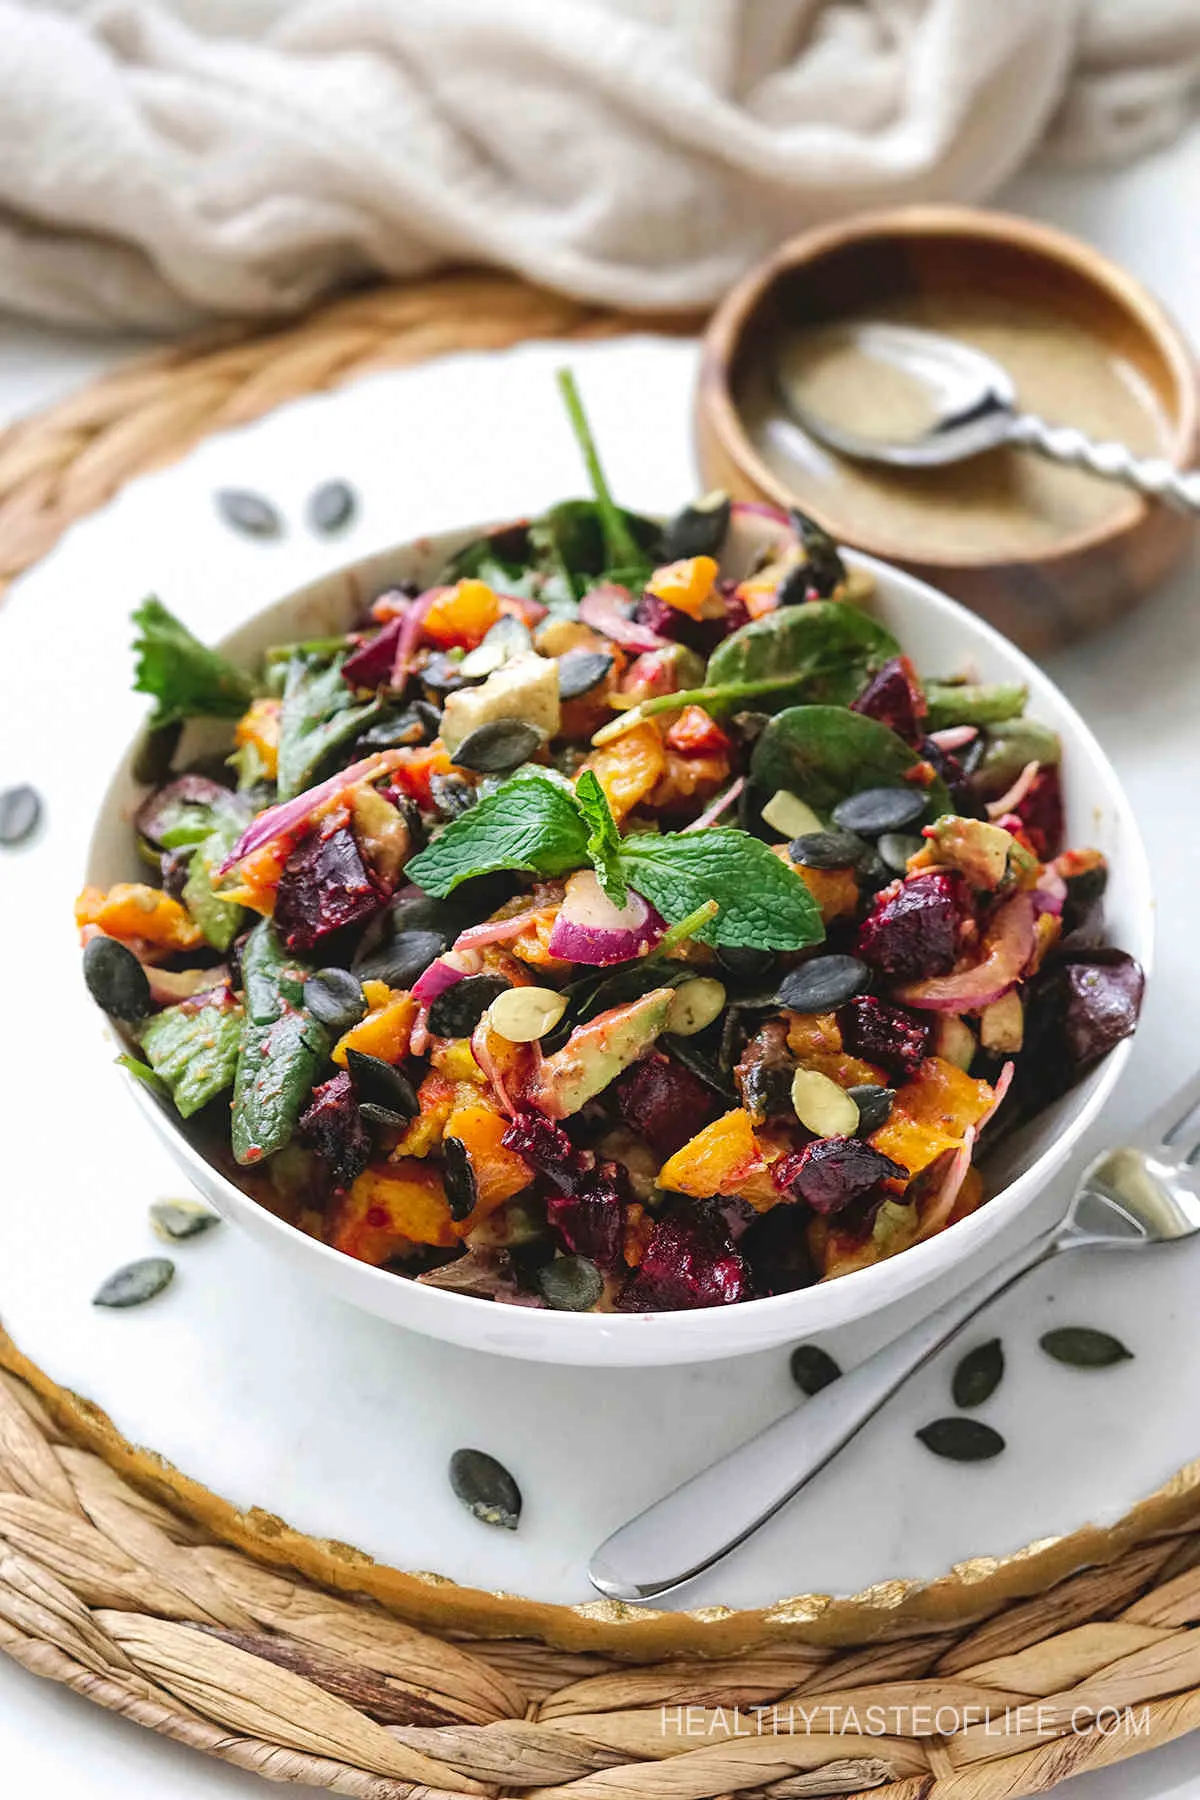 Pumpkin and beetroot salad with roasted veggies and dressing.